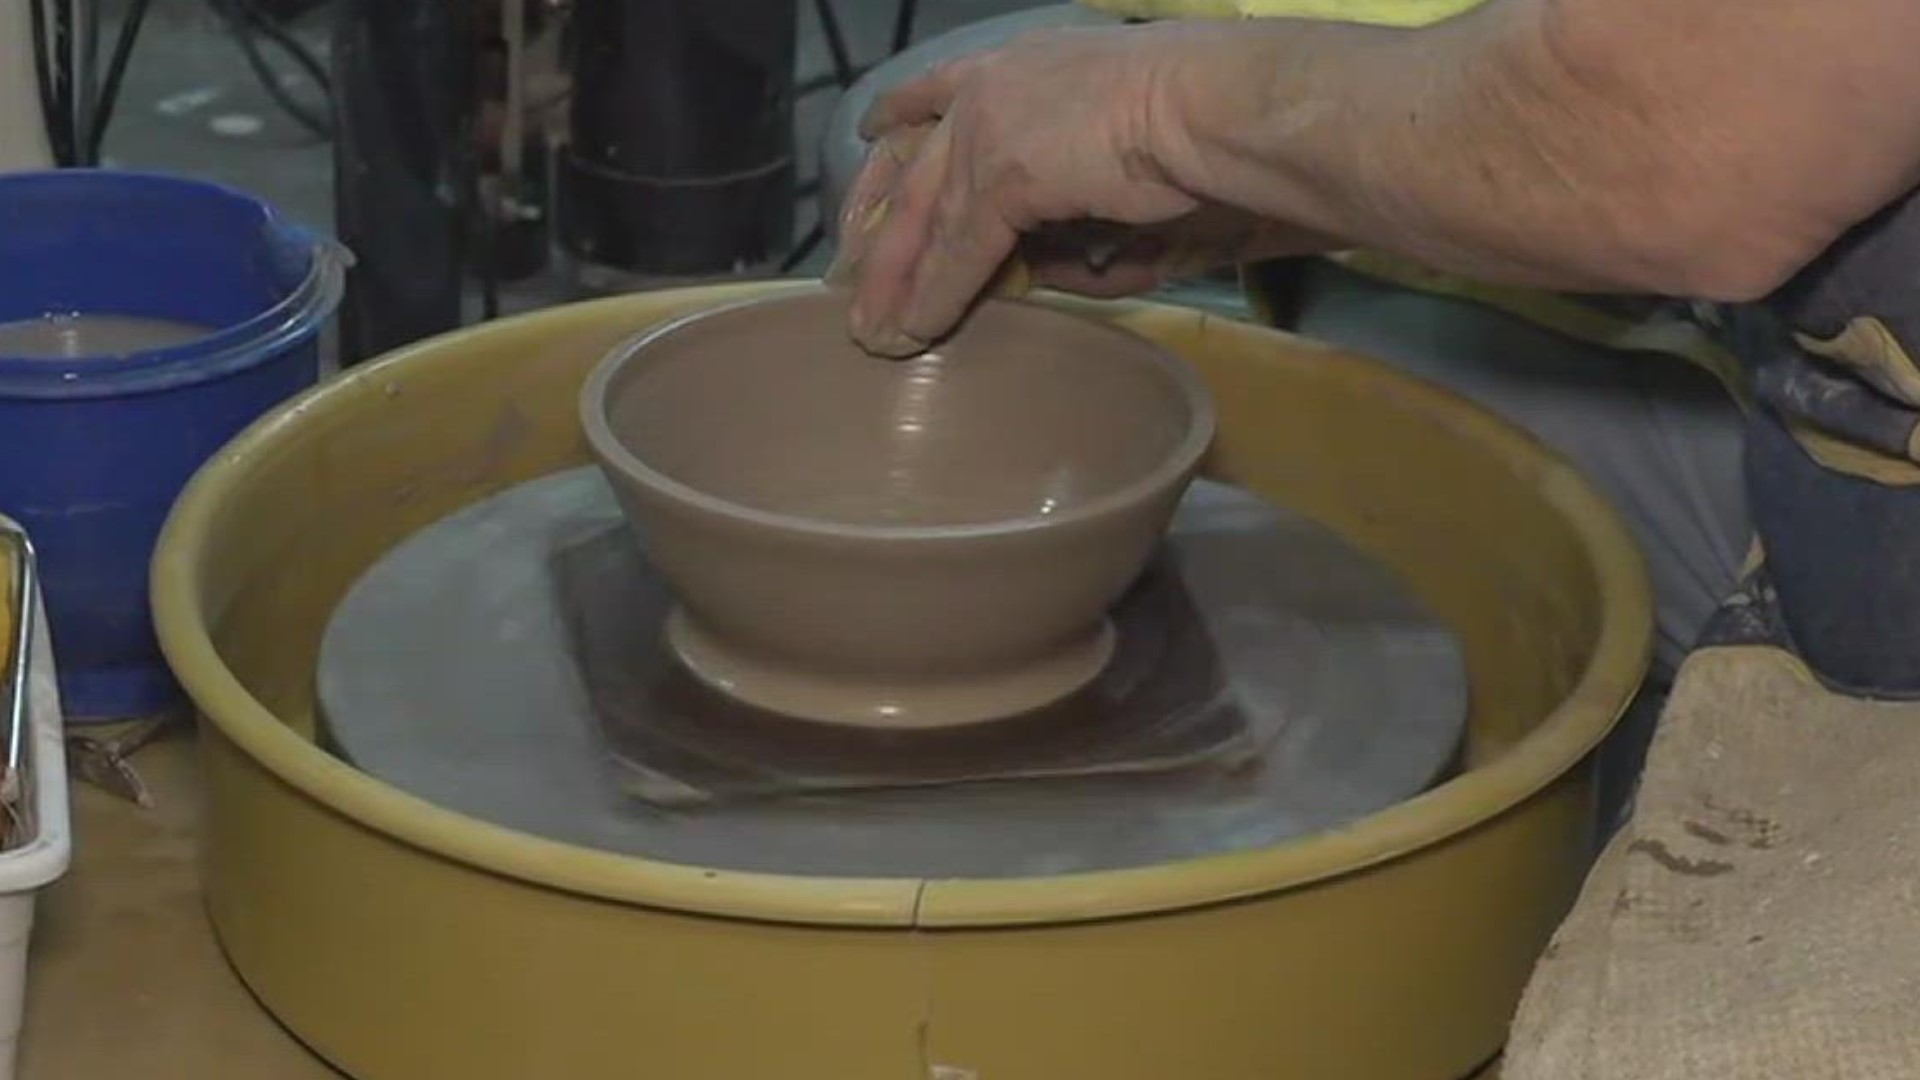 Several clay artists are getting their bowls ready to sell at the event. The proceeds will go toward the Coastal Bend Food Bank's mission of fighting hunger.